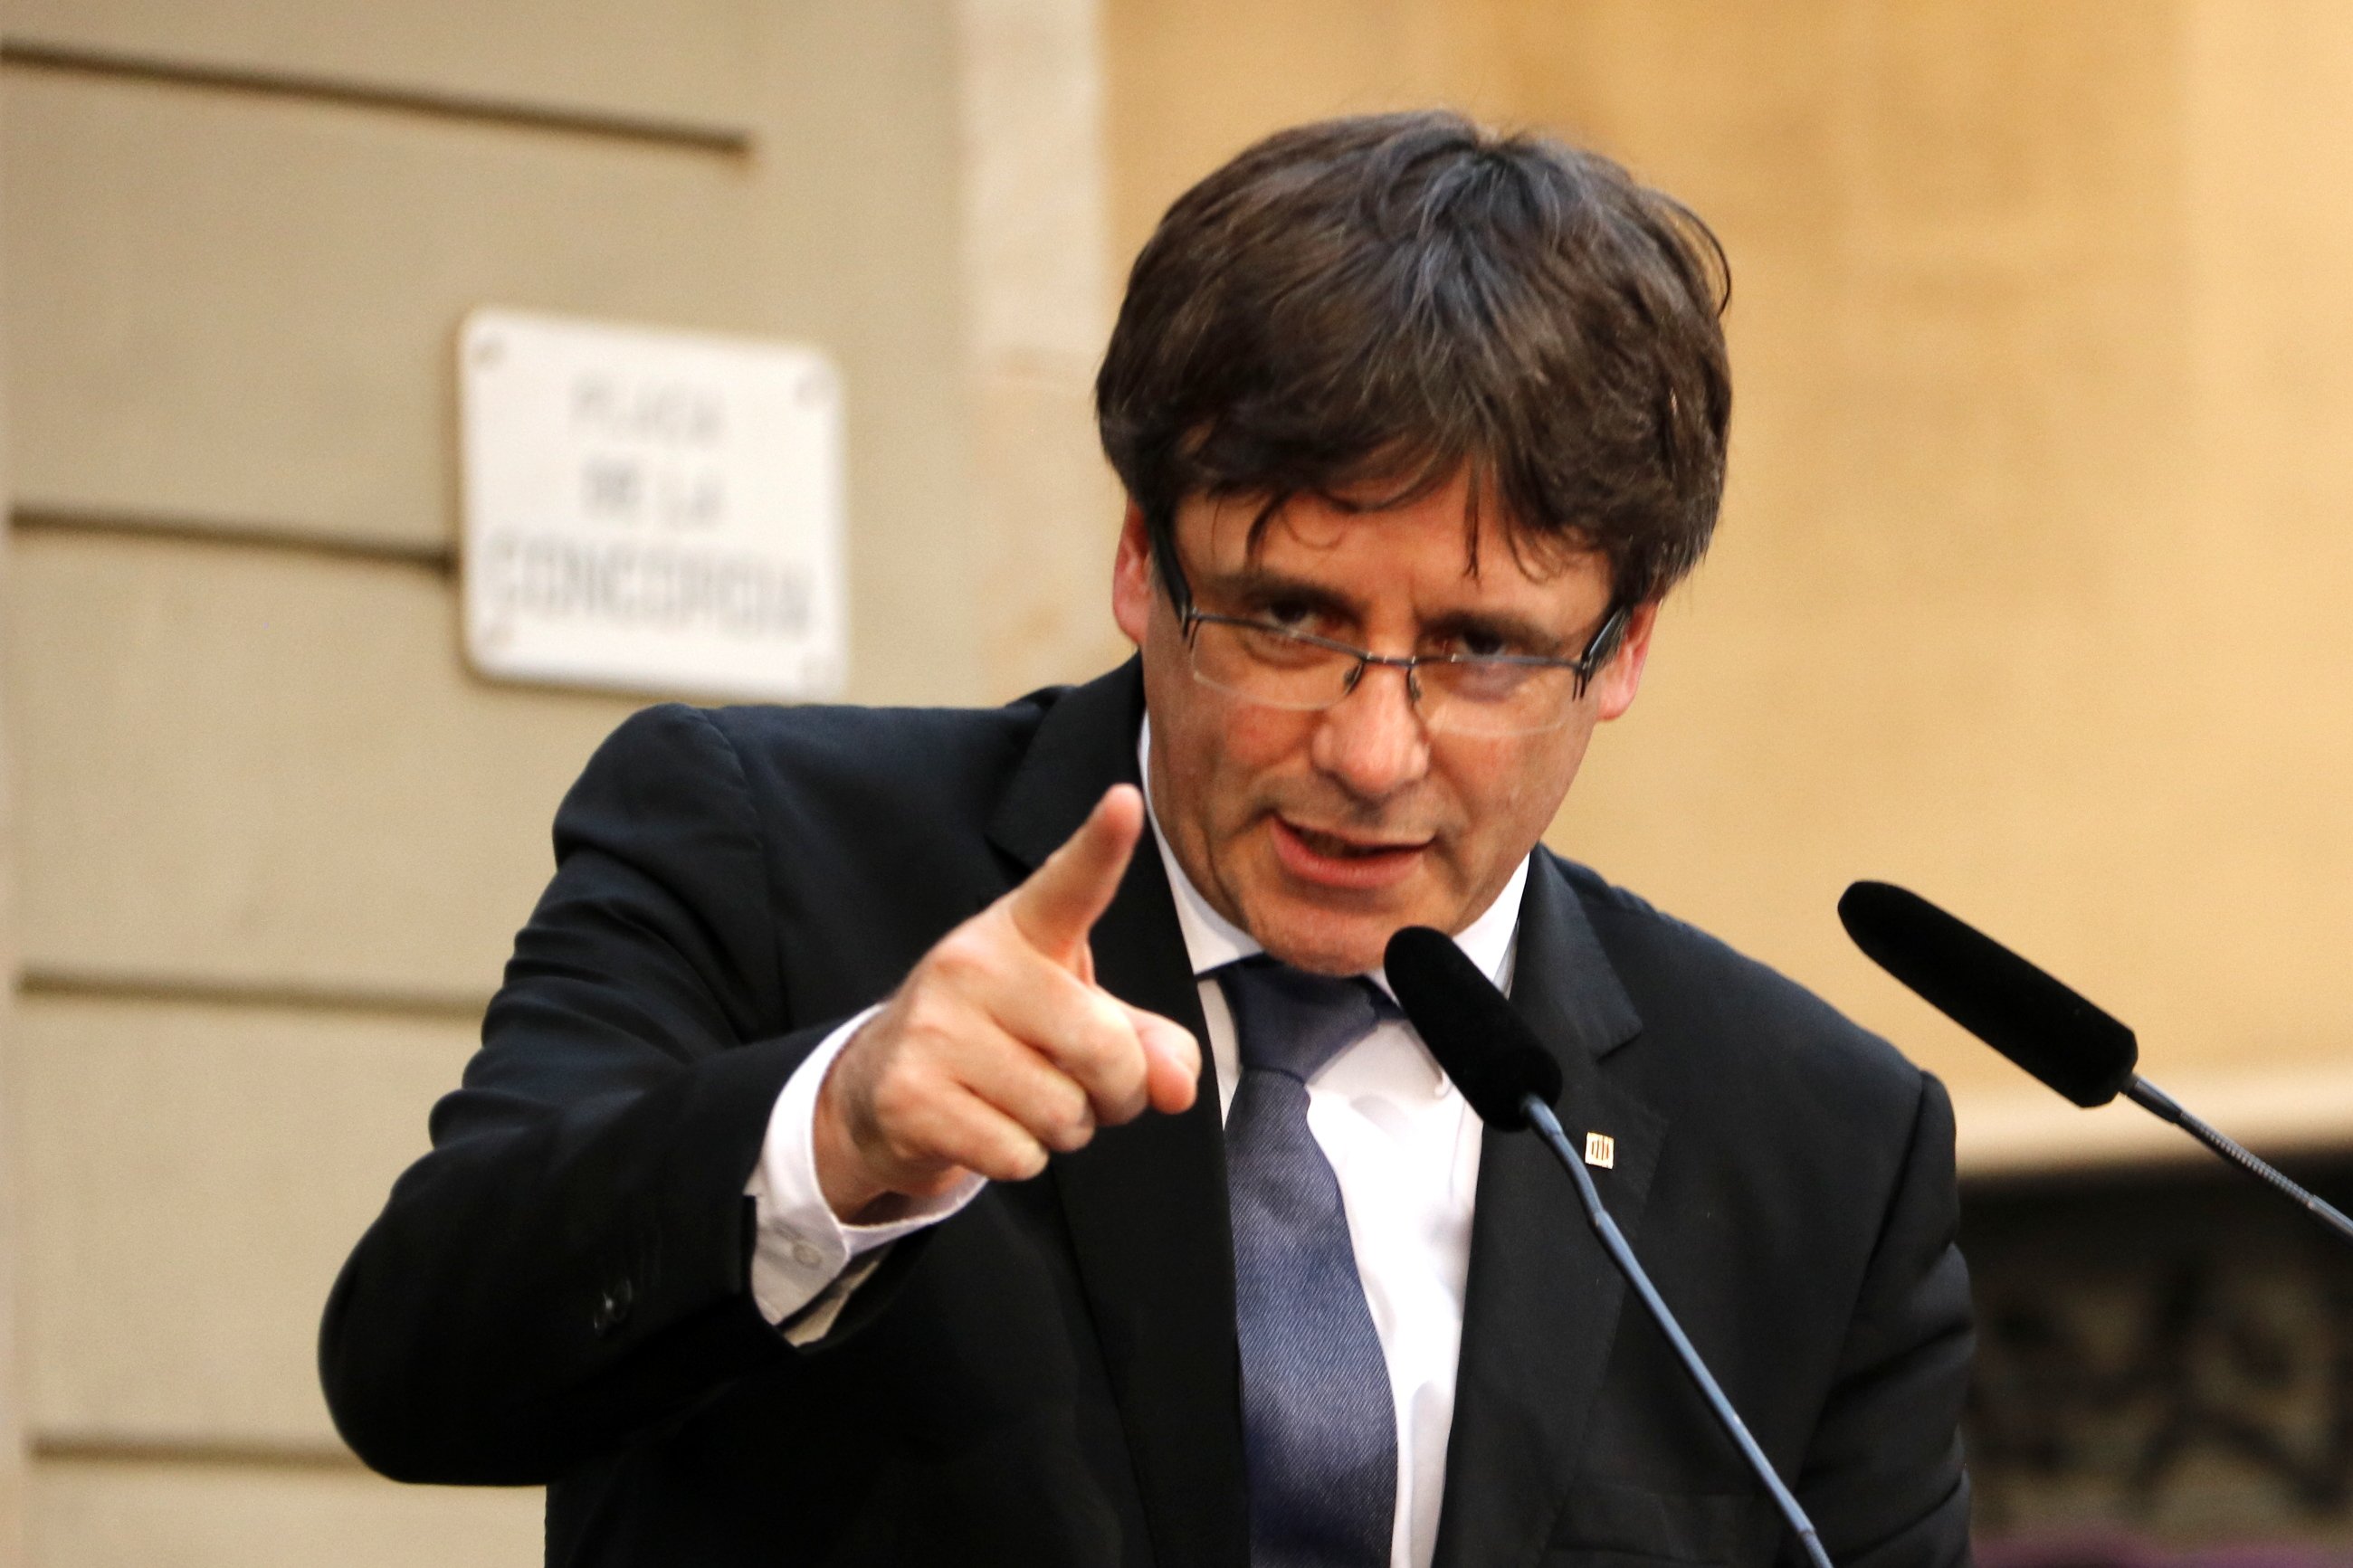 Puigdemont challenges the TC: "If it disqualifies me, I will not accept the decision"